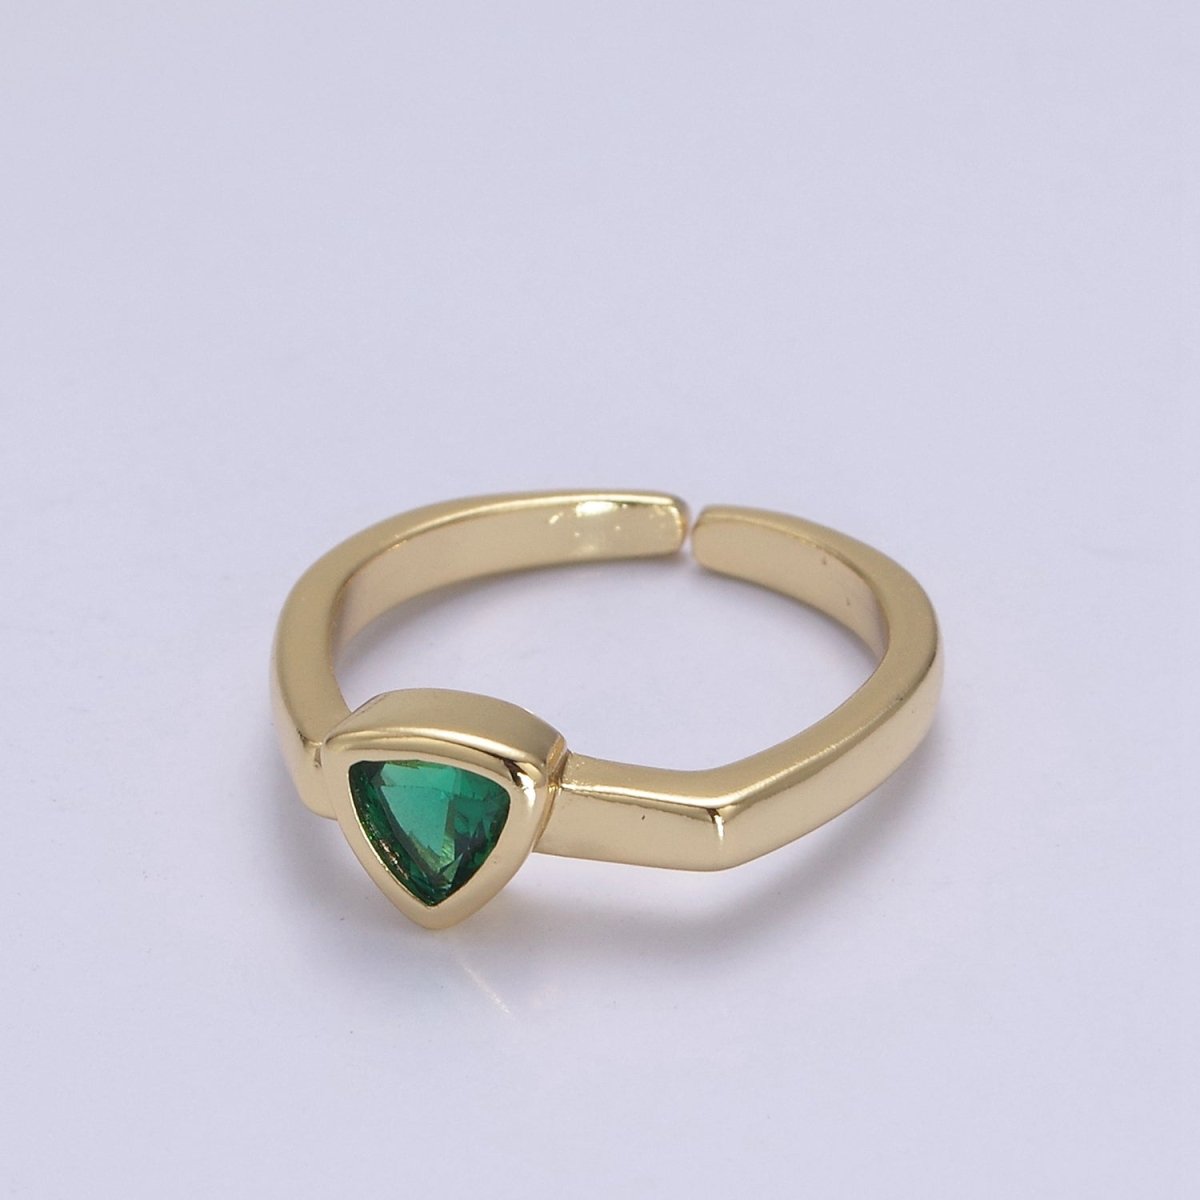 Gold Green CZ ring, Emerald ring, open ring, adjustable ring, green stone ring, dainty ring, stackable ring U-501 - DLUXCA